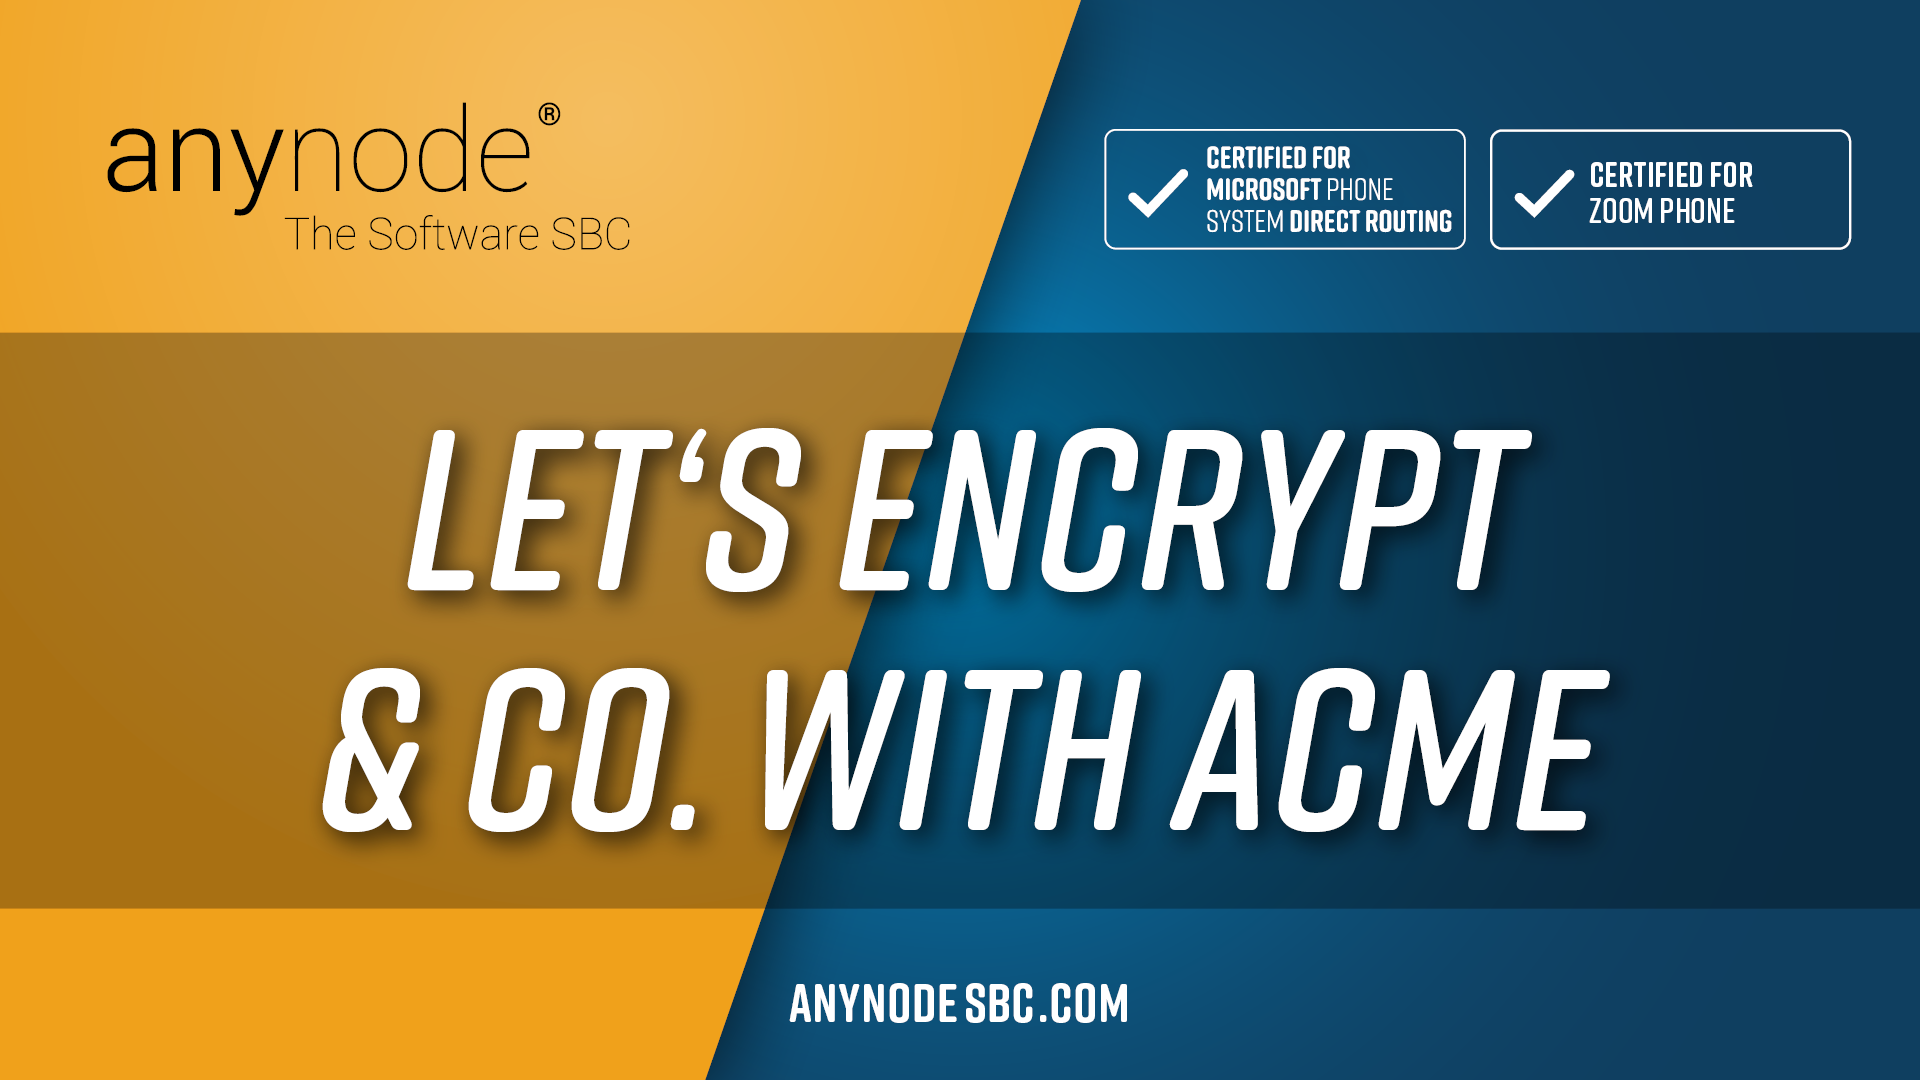 Features Let's Encrypt & Co. with ACME